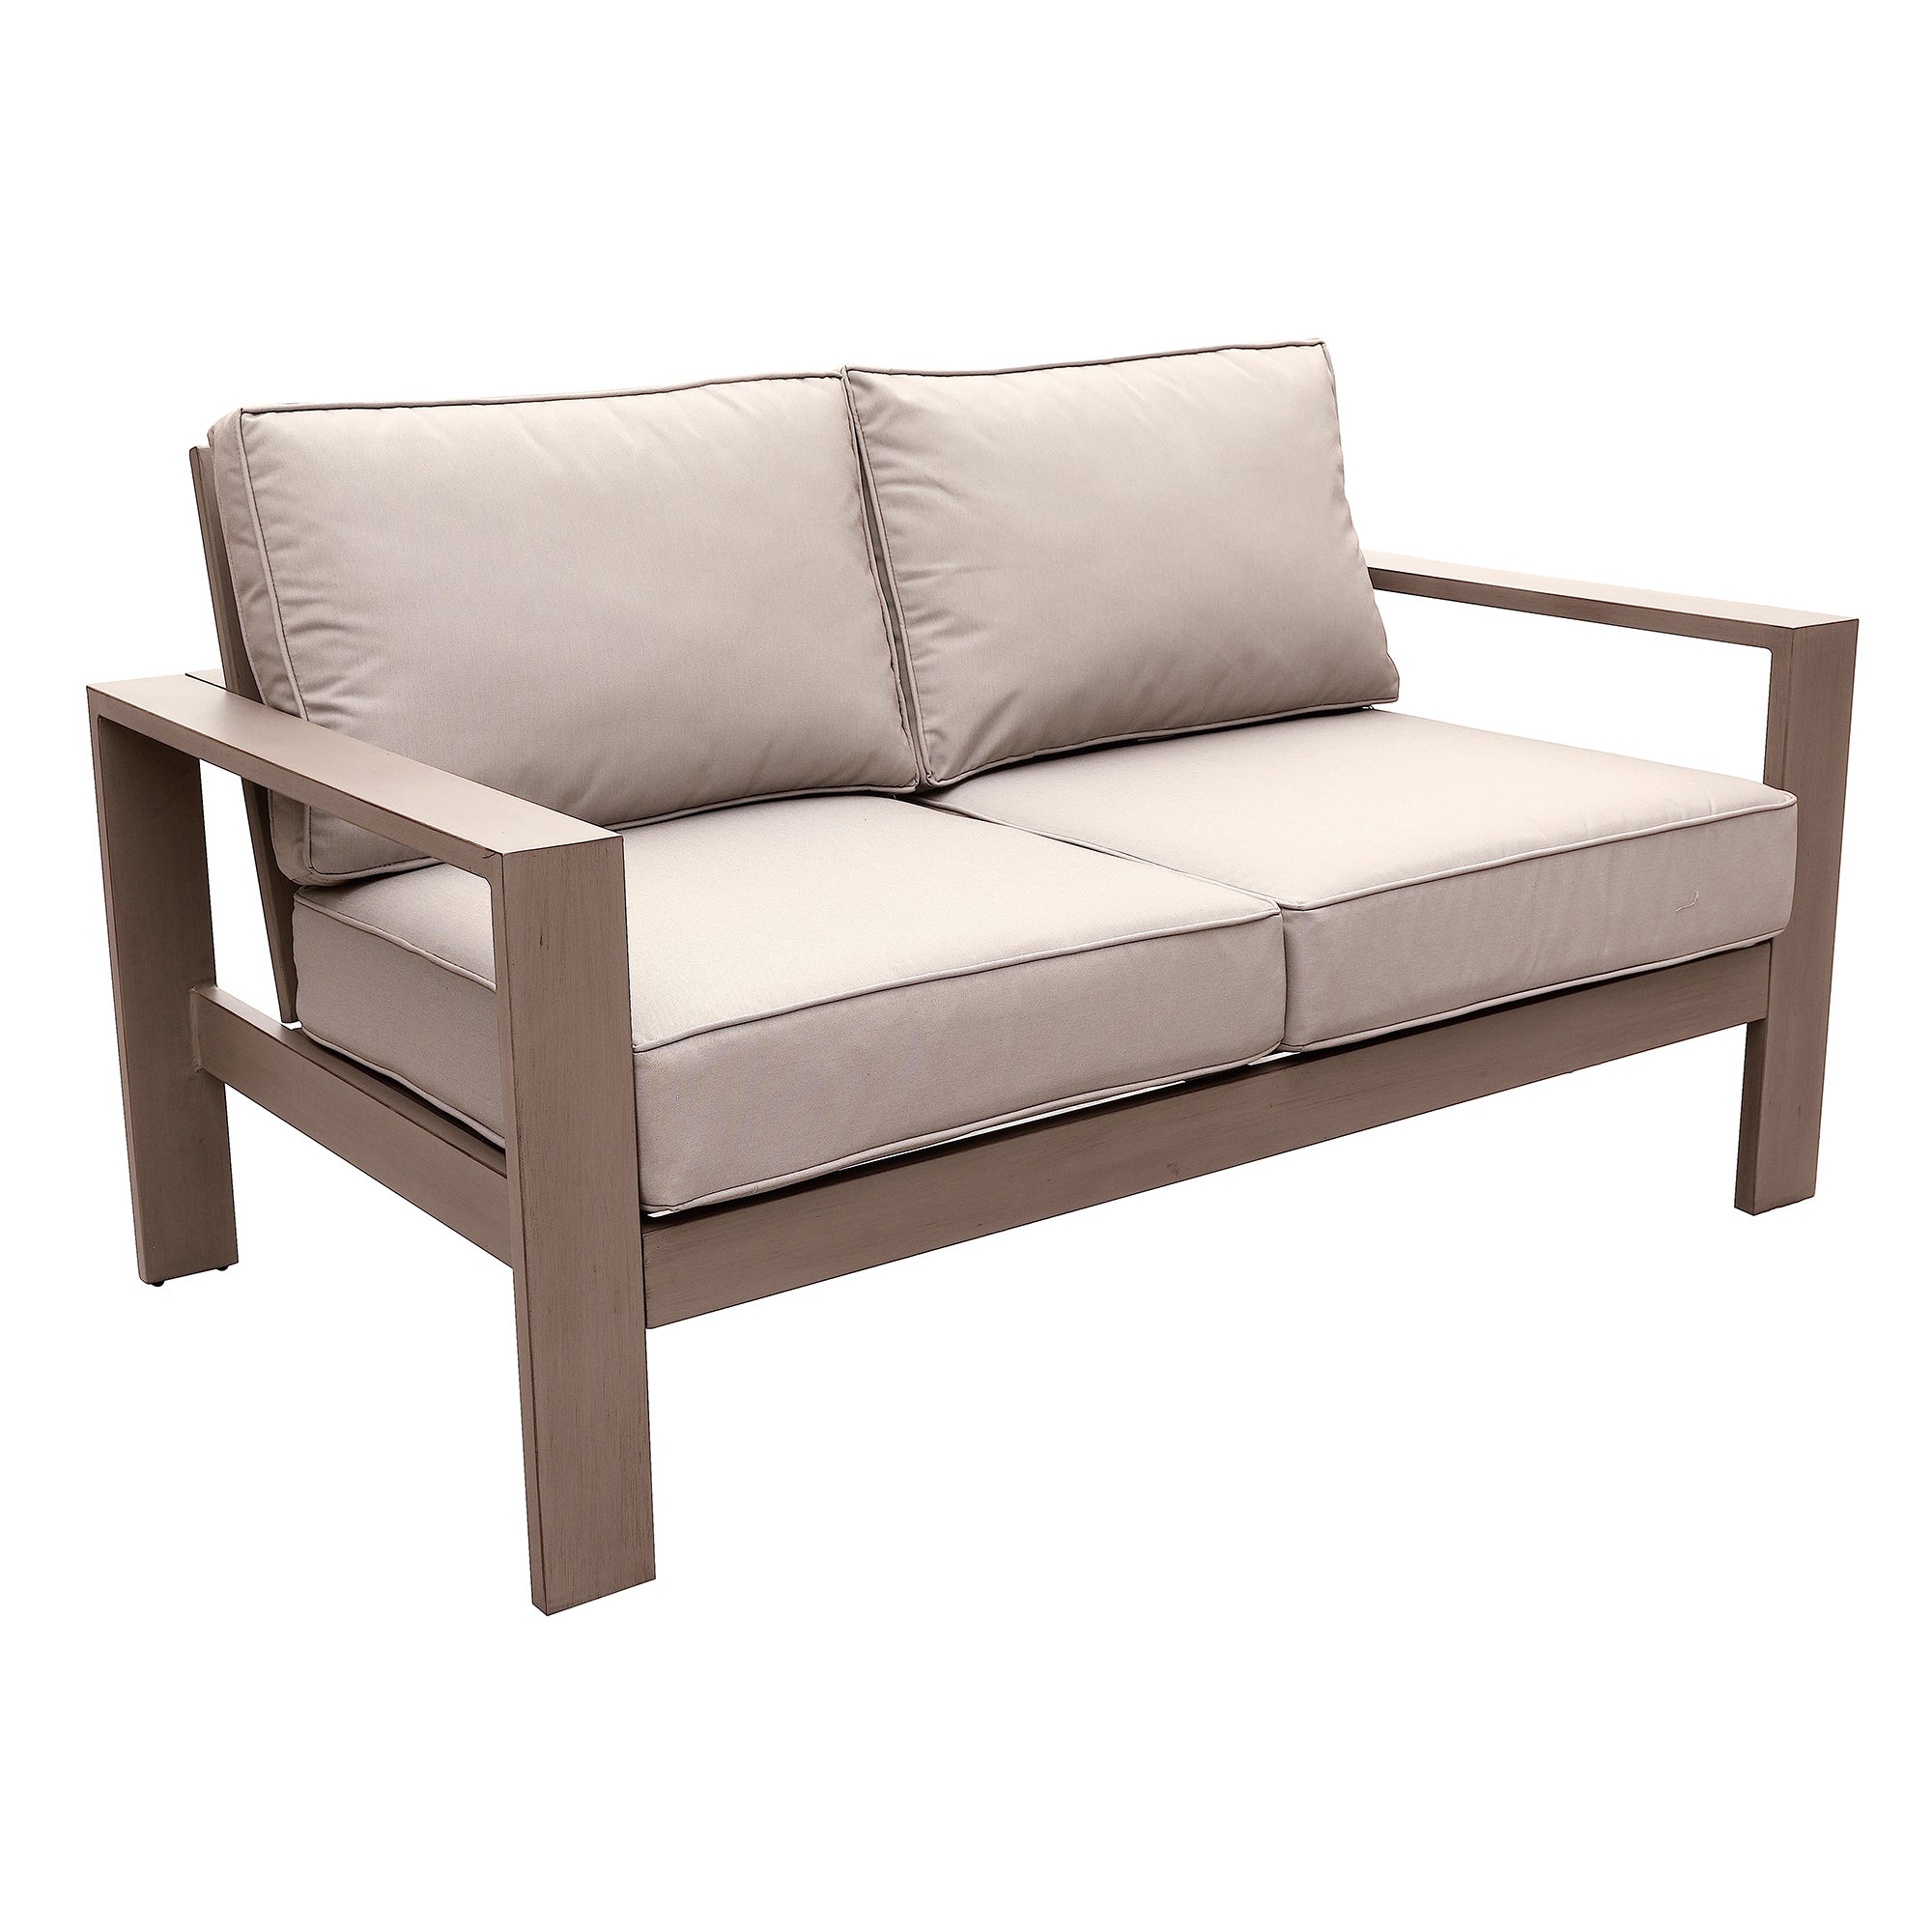 4 Piece Sofa Seating Group with Cushions, Wood Grained pewter-polyester-aluminum